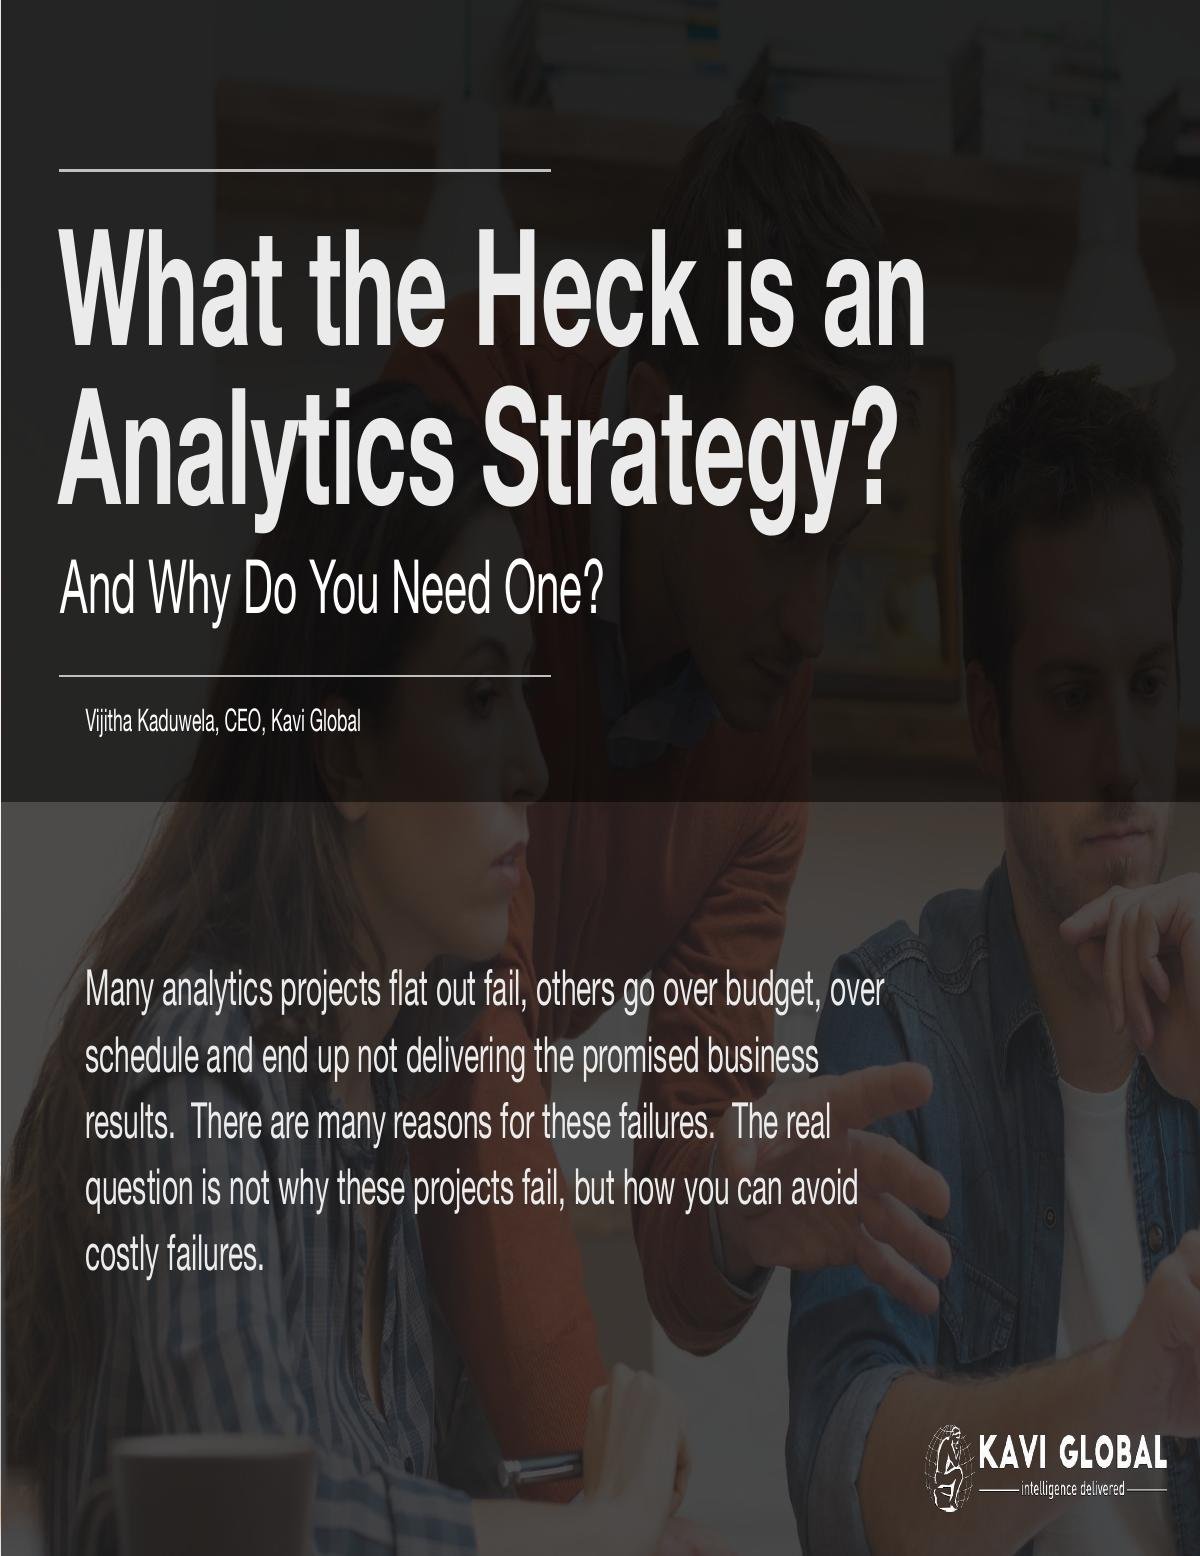 What the Heck is an Analytics Strategy?